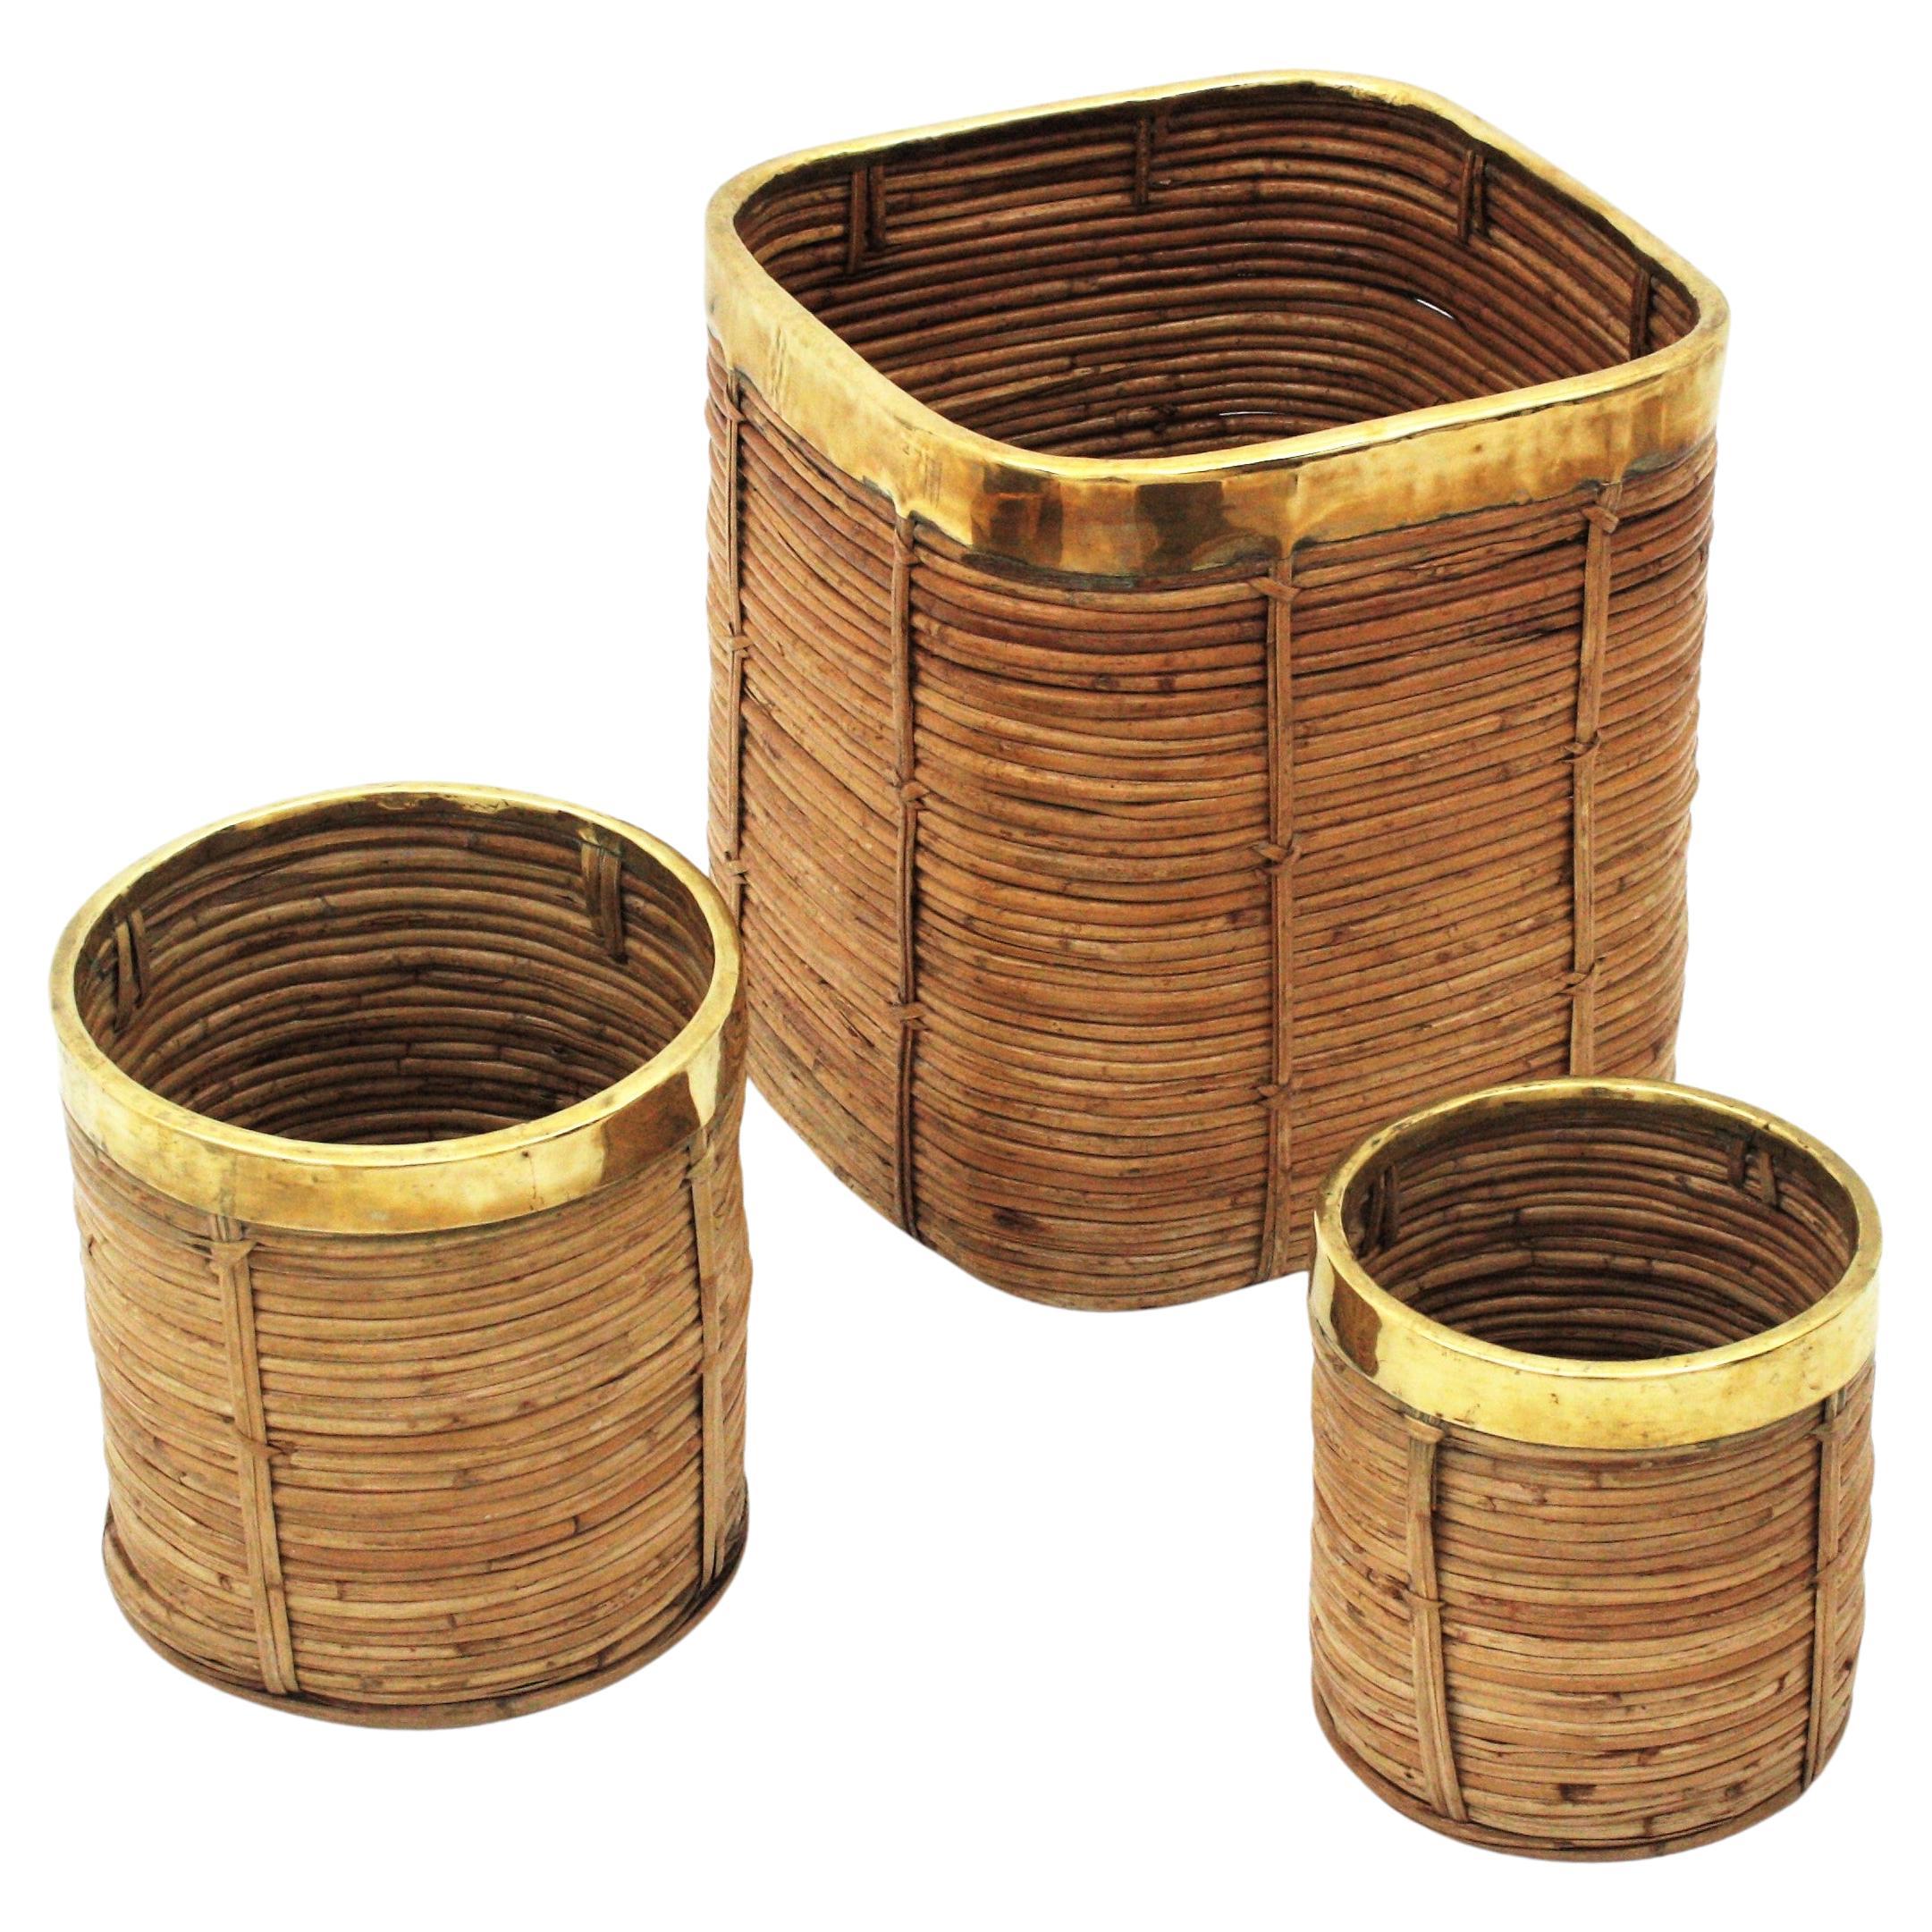 Three Rattan Bamboo Planters / Baskets with Brass Rim, Italy, 1970s For Sale